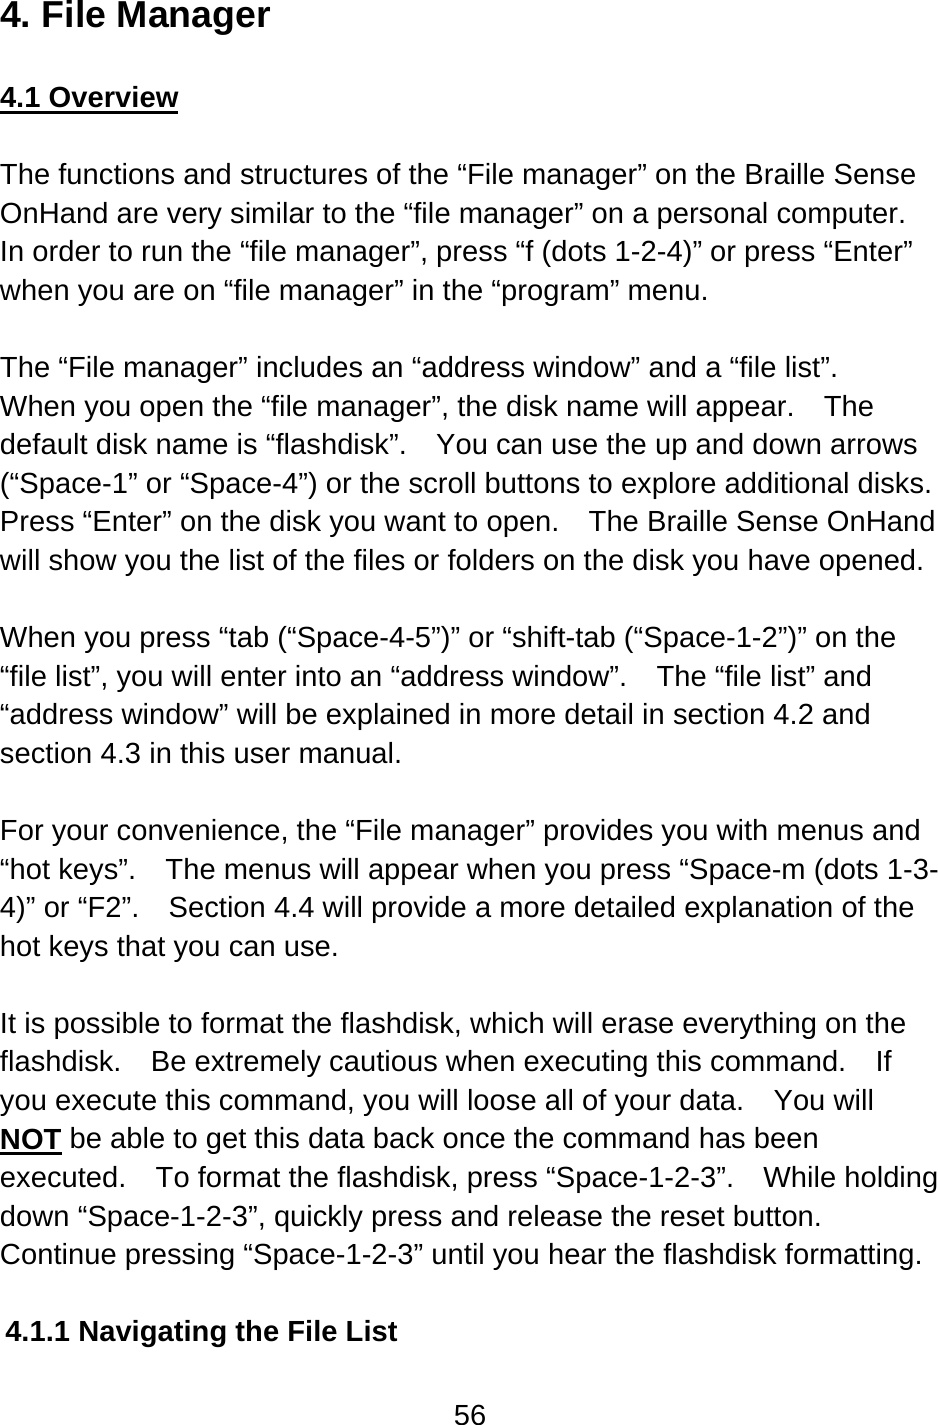 56  4. File Manager  4.1 Overview  The functions and structures of the “File manager” on the Braille Sense OnHand are very similar to the “file manager” on a personal computer.   In order to run the “file manager”, press “f (dots 1-2-4)” or press “Enter” when you are on “file manager” in the “program” menu.  The “File manager” includes an “address window” and a “file list”.   When you open the “file manager”, the disk name will appear.    The default disk name is “flashdisk”.    You can use the up and down arrows (“Space-1” or “Space-4”) or the scroll buttons to explore additional disks.   Press “Enter” on the disk you want to open.    The Braille Sense OnHand will show you the list of the files or folders on the disk you have opened.  When you press “tab (“Space-4-5”)” or “shift-tab (“Space-1-2”)” on the “file list”, you will enter into an “address window”.    The “file list” and “address window” will be explained in more detail in section 4.2 and section 4.3 in this user manual.  For your convenience, the “File manager” provides you with menus and “hot keys”.    The menus will appear when you press “Space-m (dots 1-3-4)” or “F2”.    Section 4.4 will provide a more detailed explanation of the hot keys that you can use.  It is possible to format the flashdisk, which will erase everything on the flashdisk.  Be extremely cautious when executing this command.    If you execute this command, you will loose all of your data.    You will NOT be able to get this data back once the command has been executed.    To format the flashdisk, press “Space-1-2-3”.    While holding down “Space-1-2-3”, quickly press and release the reset button.   Continue pressing “Space-1-2-3” until you hear the flashdisk formatting.  4.1.1 Navigating the File List  